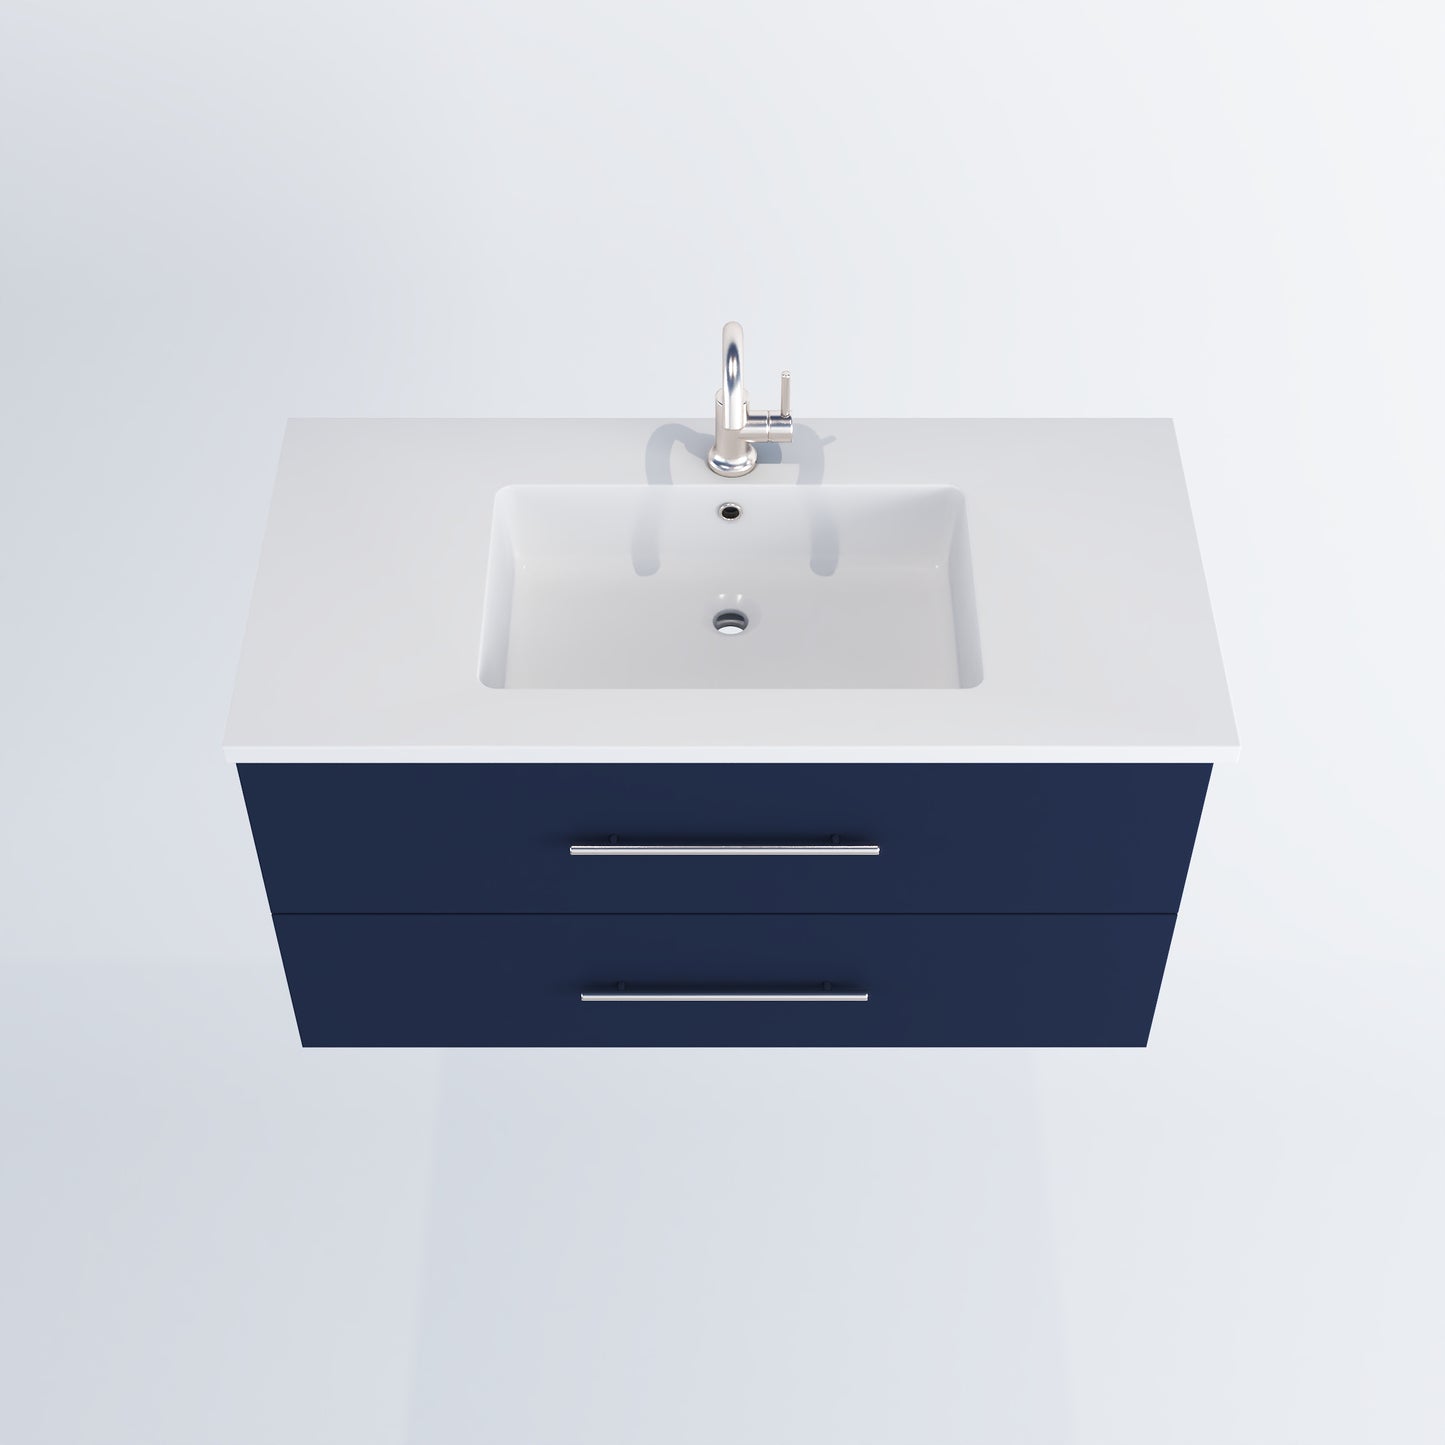 Napa 40" Bathroom Vanity with integrated counter top